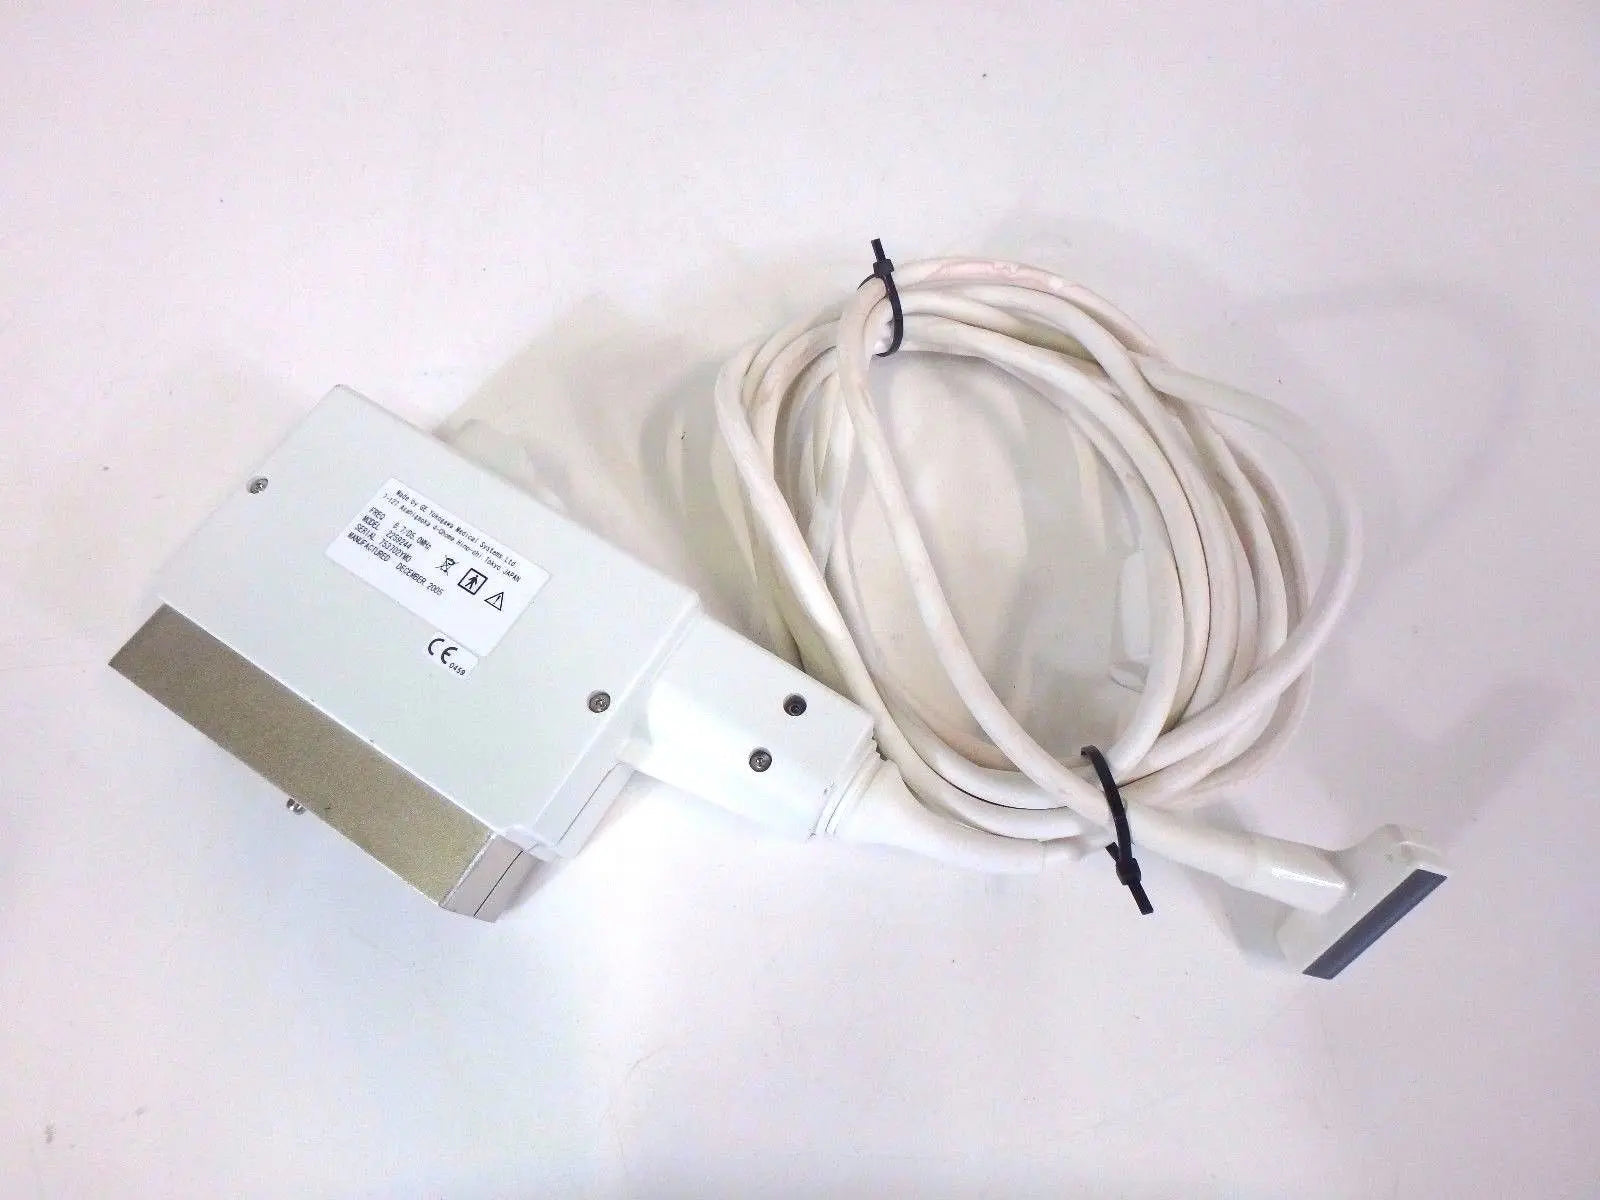 GE T739 Intraoperative 6.7/D5 0MHz Ultrasound Transducer Probe 2259244 Medical DIAGNOSTIC ULTRASOUND MACHINES FOR SALE